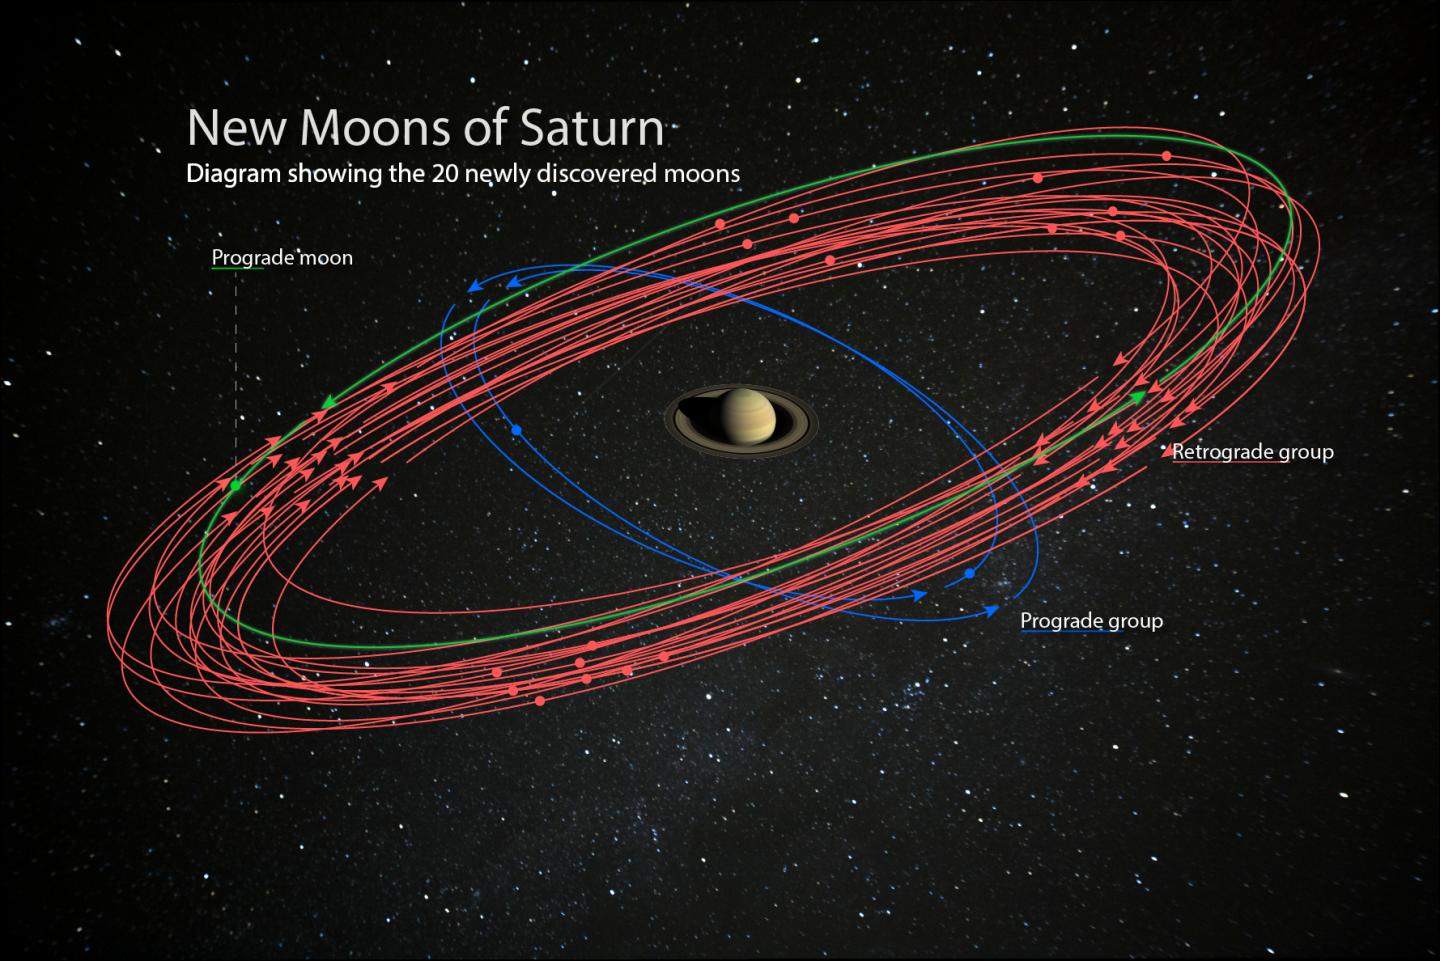 Now Saturn is the new king of moons with 20 new ones